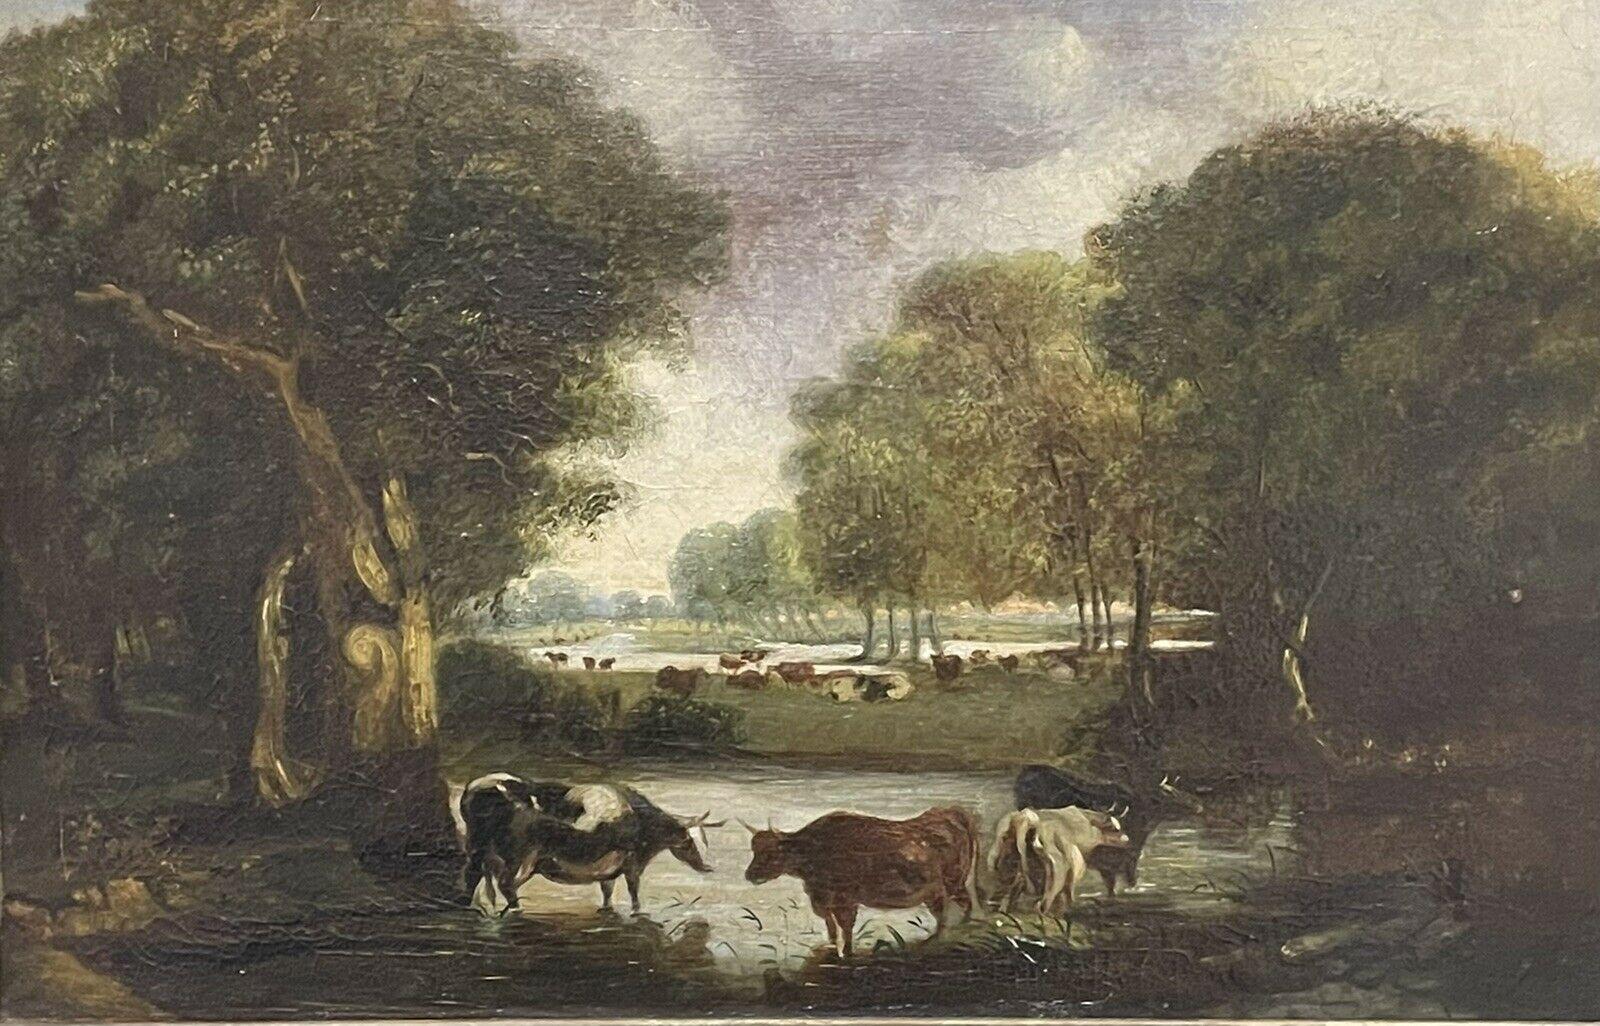 VICTORIAN 19TH CENTURY ENGLISH OIL PAINTING - CATTLE DRINKING FROM WOODLAND POOL